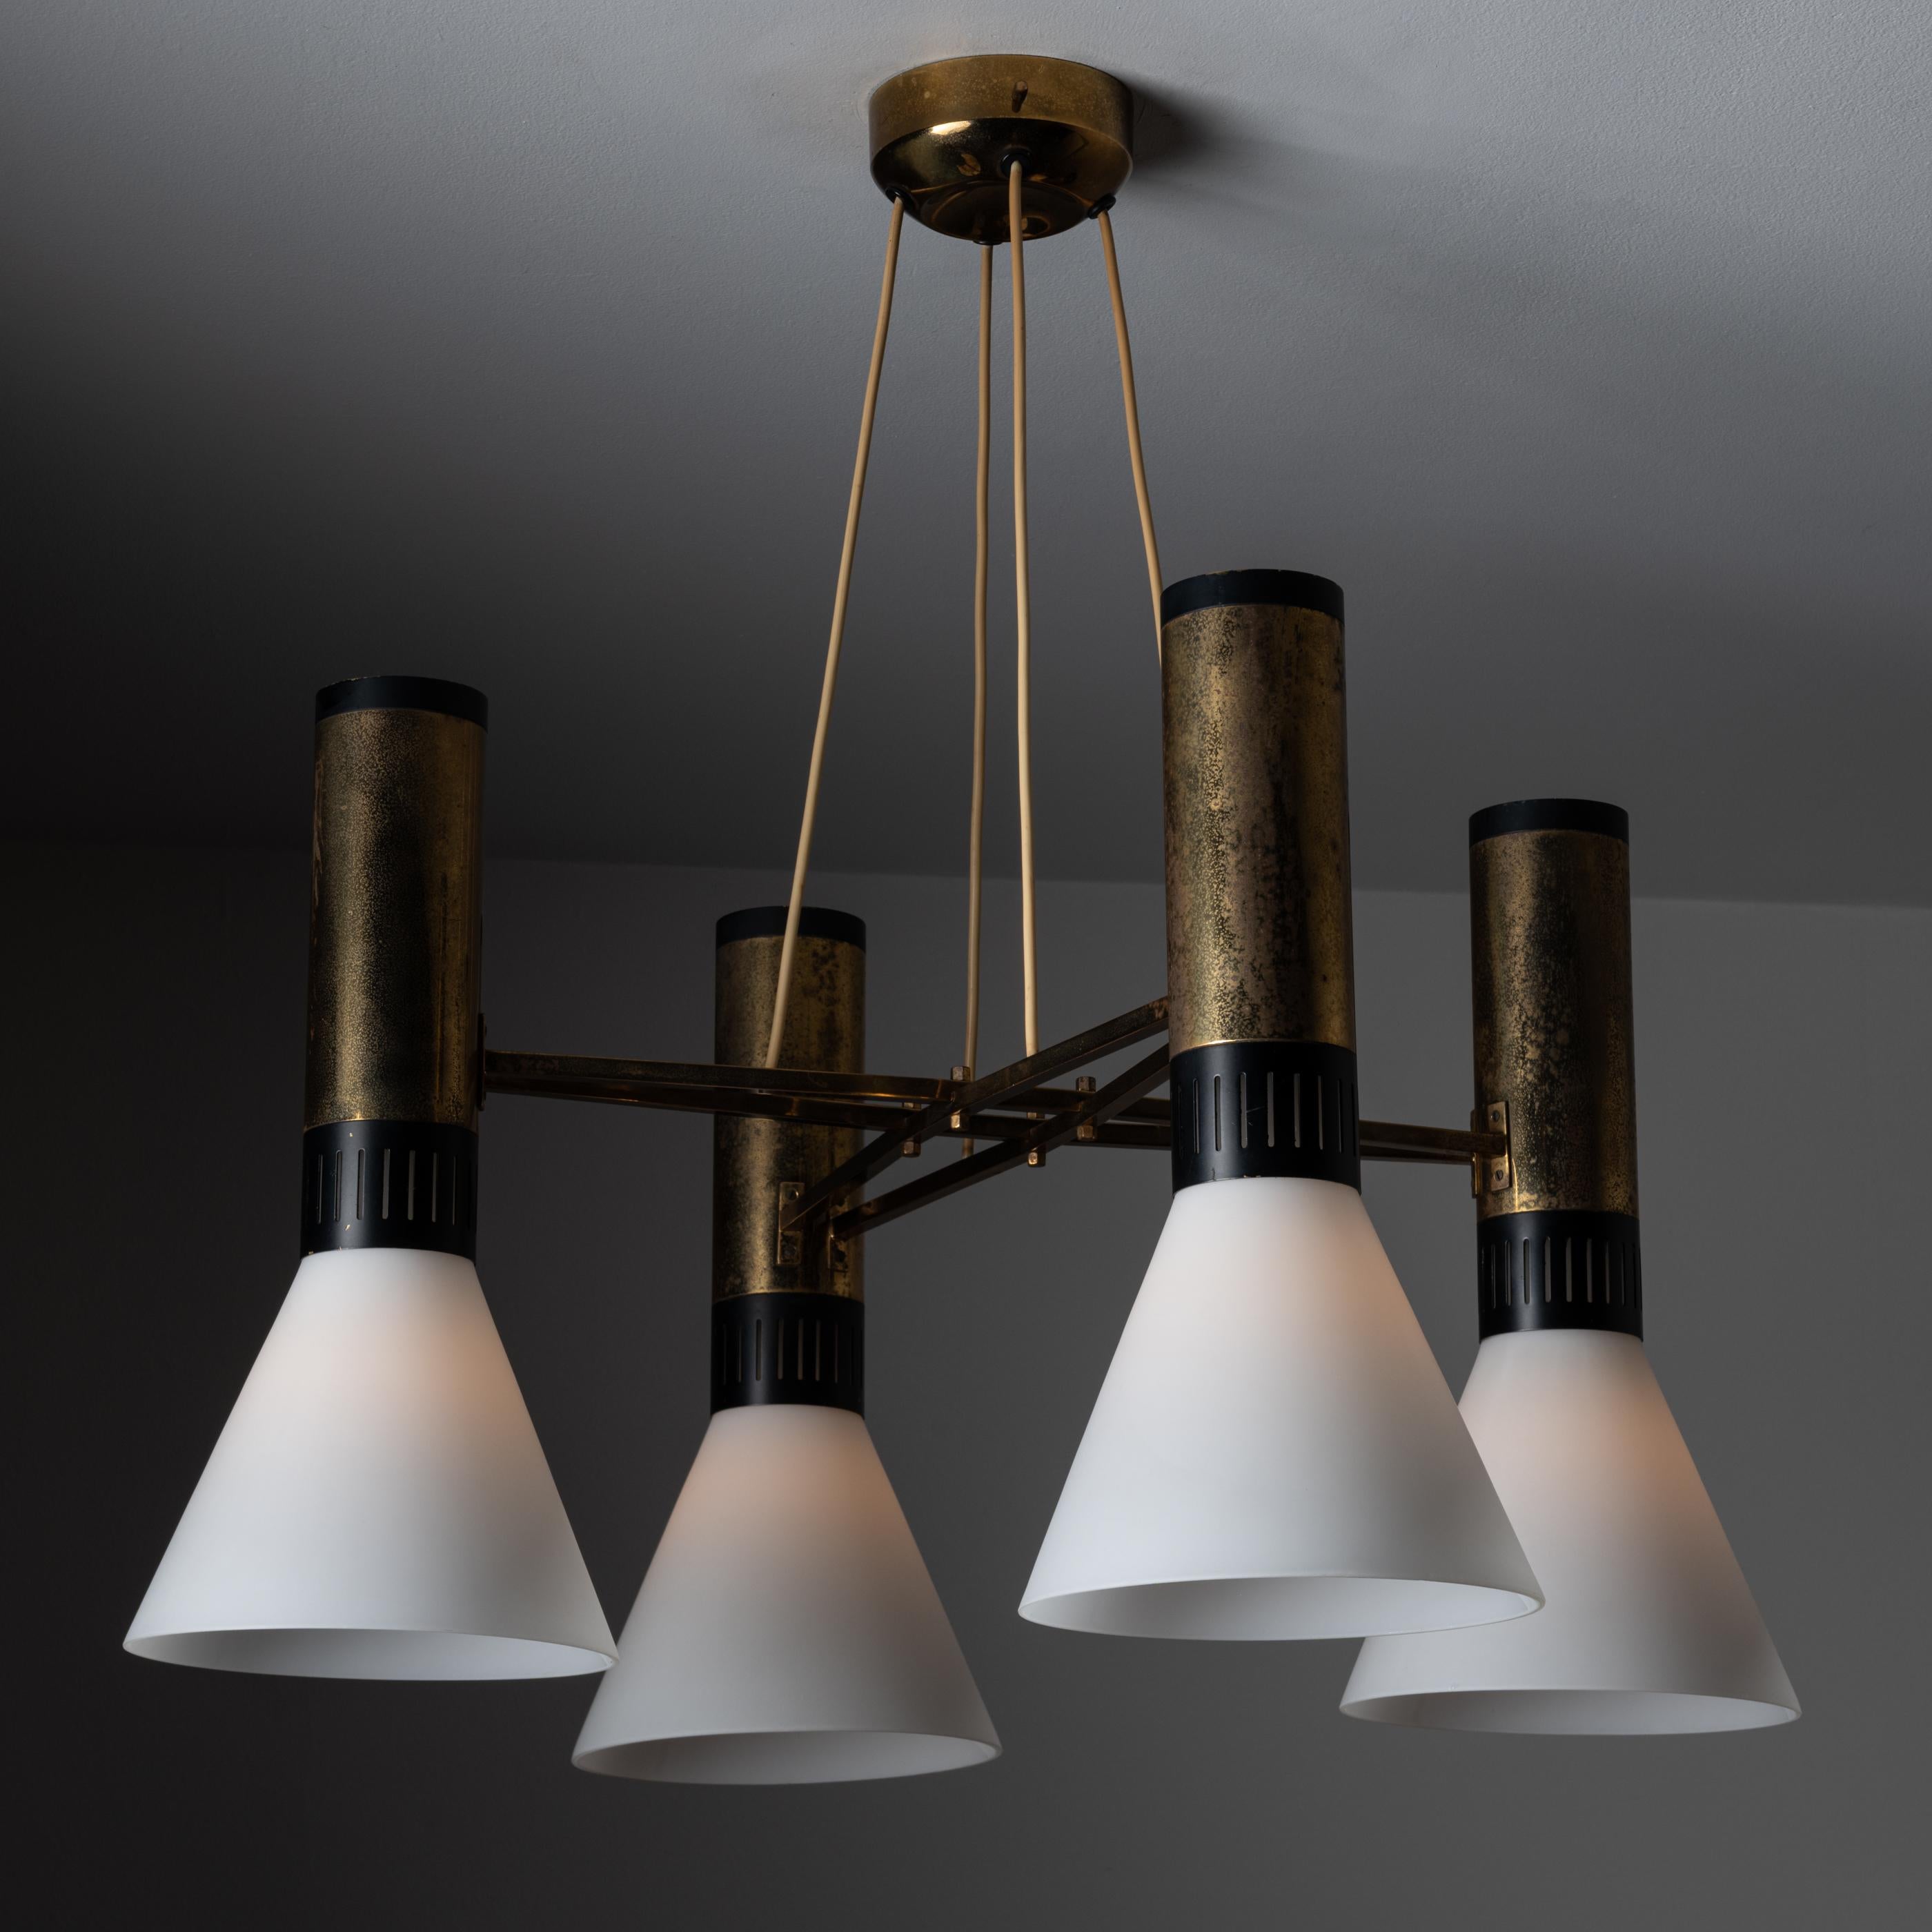 Model 1174 chandelier by Stilnovo. Designed and manufactured in Italy circa 1960. Chandelier is composed of a brass frame featuring black lacquered details surrounding the neck of four frosted cone shaped glass fixtures. We recommend four E27 60w